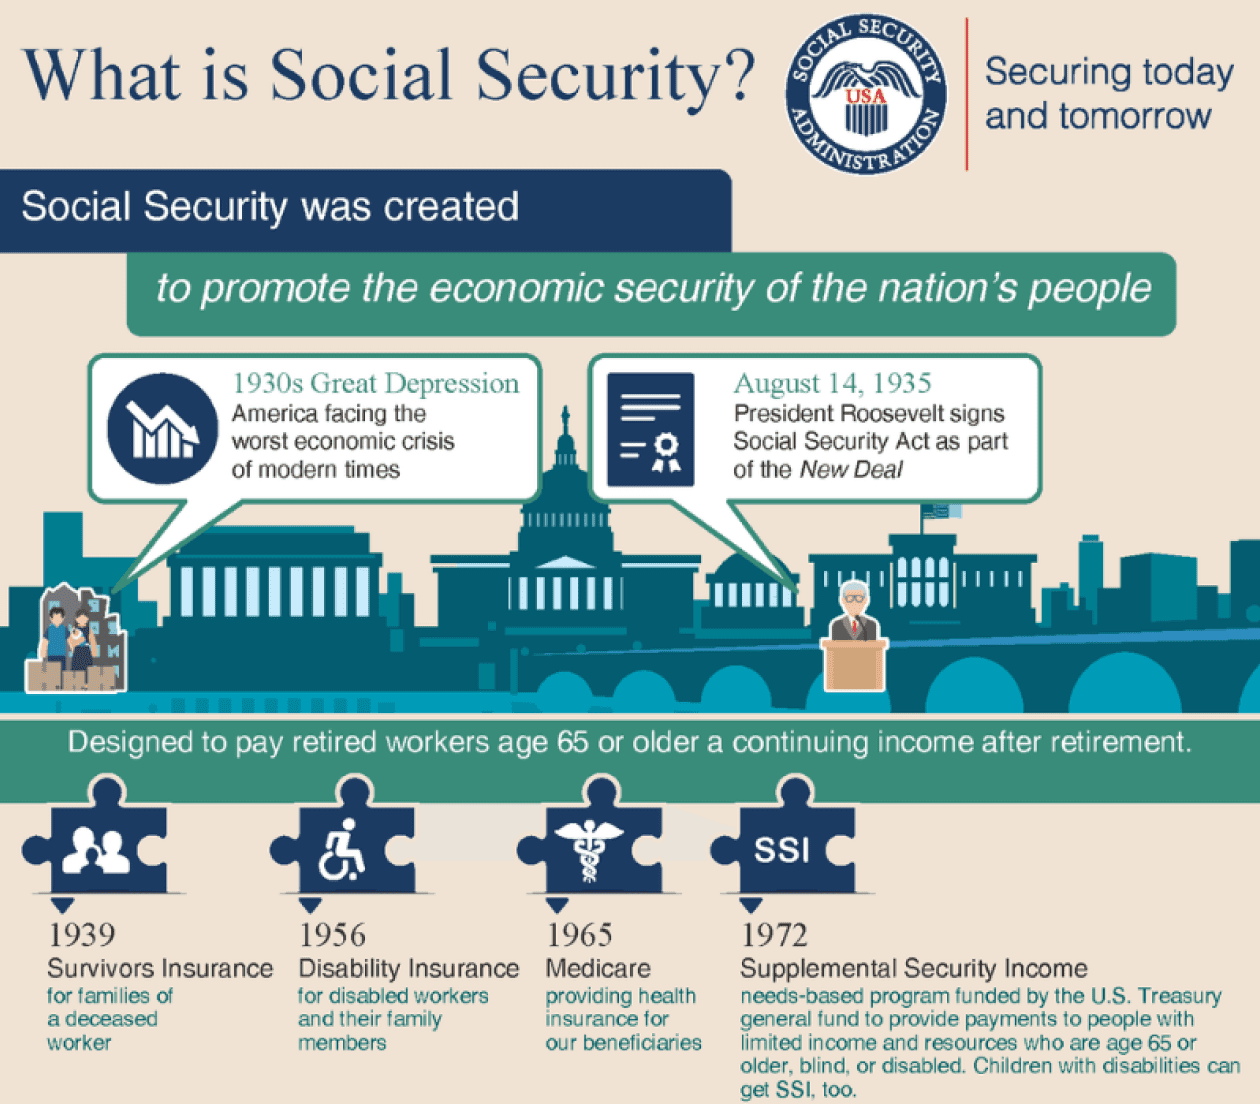 Image describing the history of Social Security, created to promote economic security. Covers retirement, survivors, disability, Medicare, and SSI. No mention of self-employed, 1099, freelancer, or taxes.